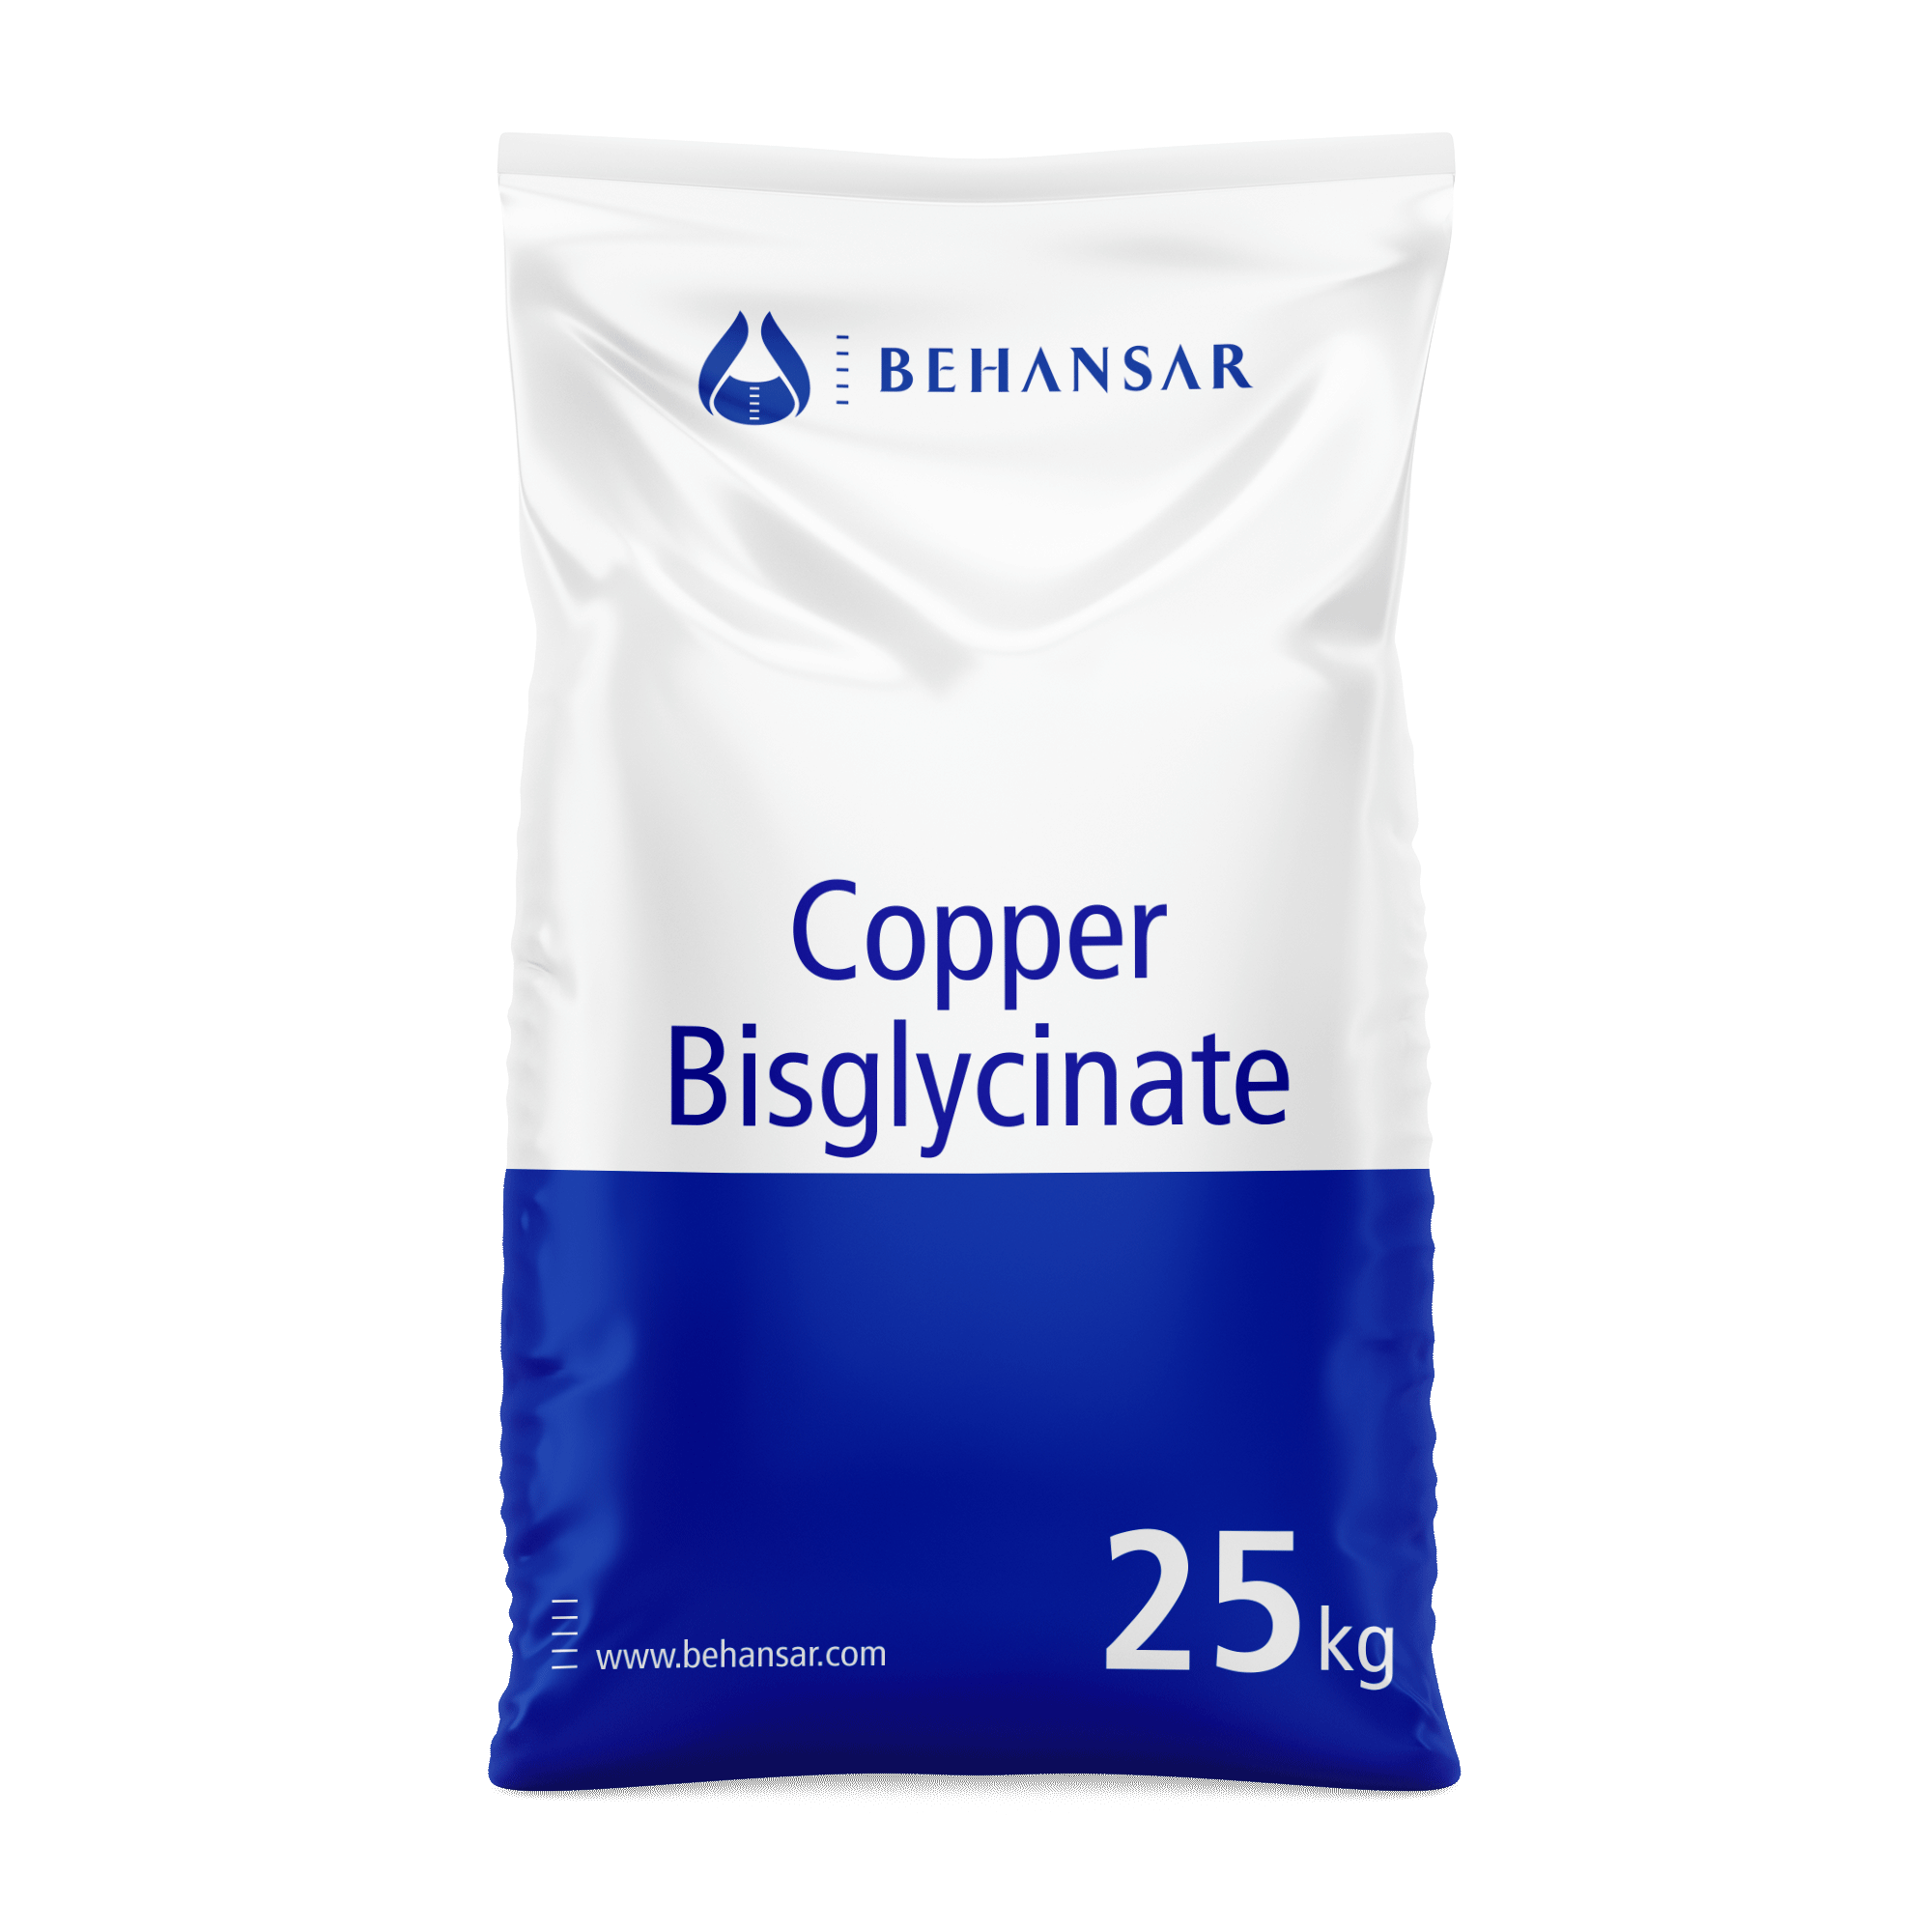 Copper Bisglycinate is one of the products of Behansar Co